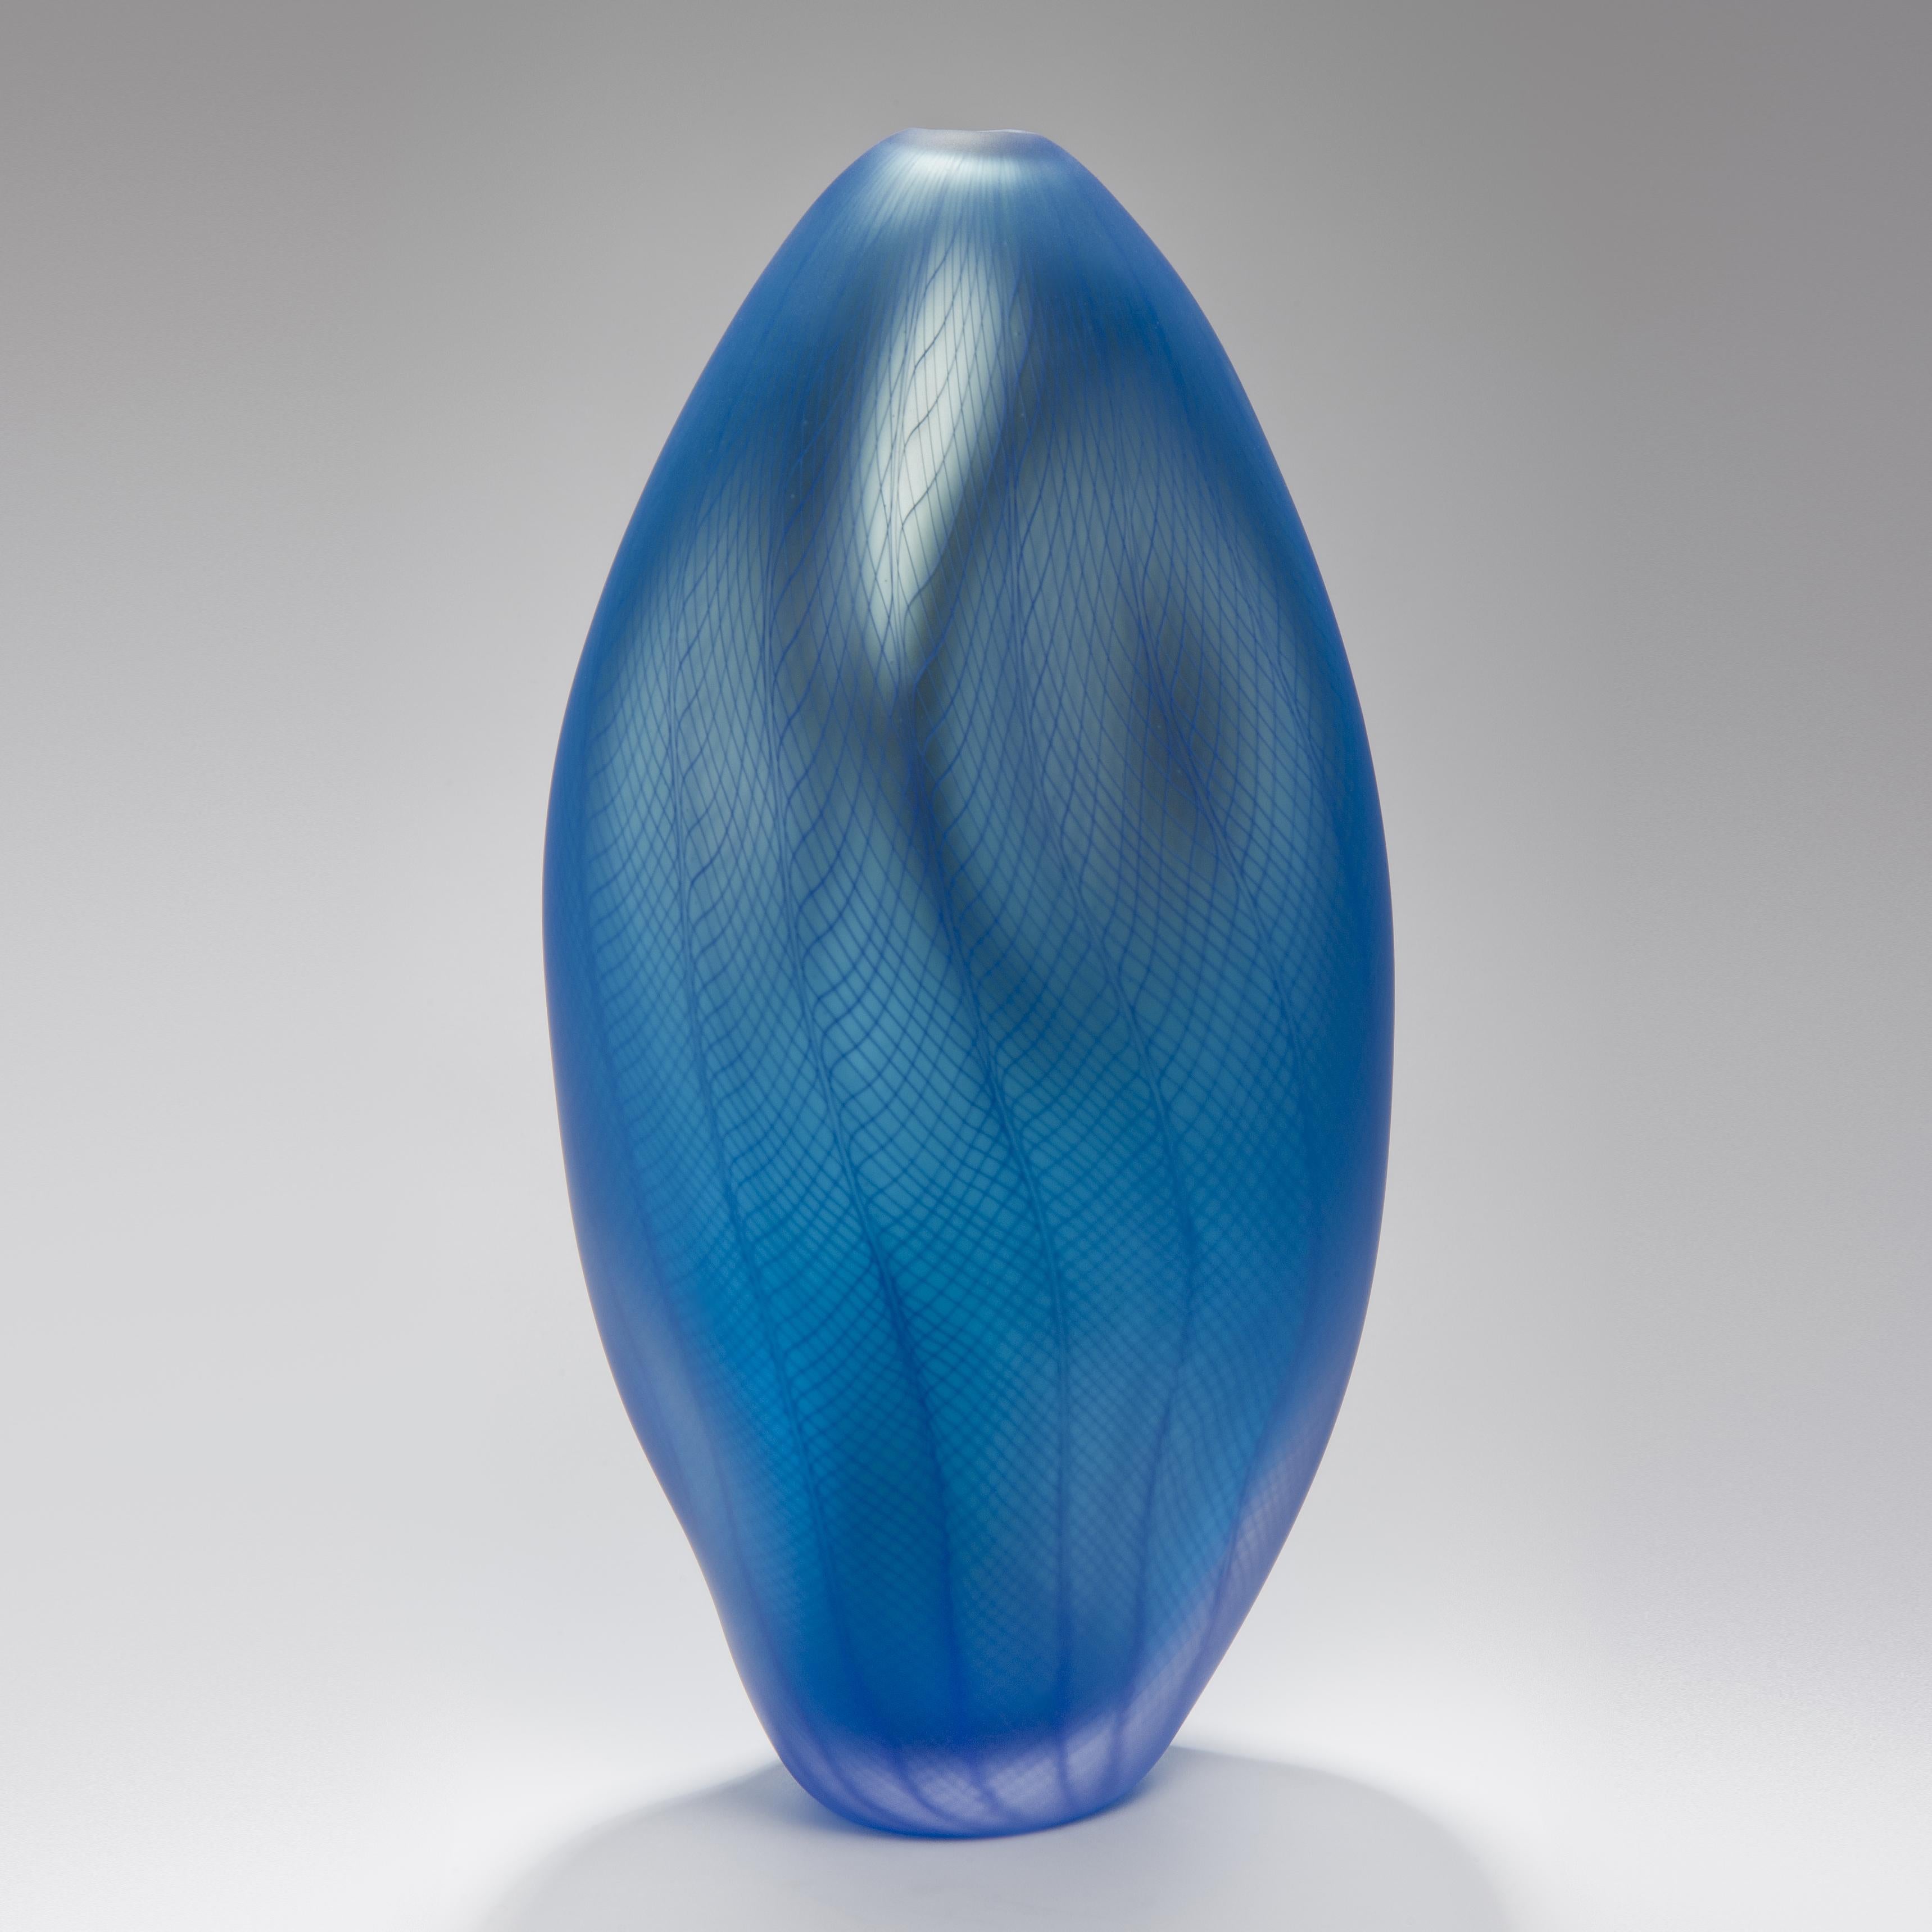 Stratiform Caeruleus 1.0.001 is a unique handblown glass vessel with fine filigree cane detail created by the British artist Liam Reeves. Handblown in aquamarine and turquoise blue coloured glass, the interior has a mirrored finish, which results in